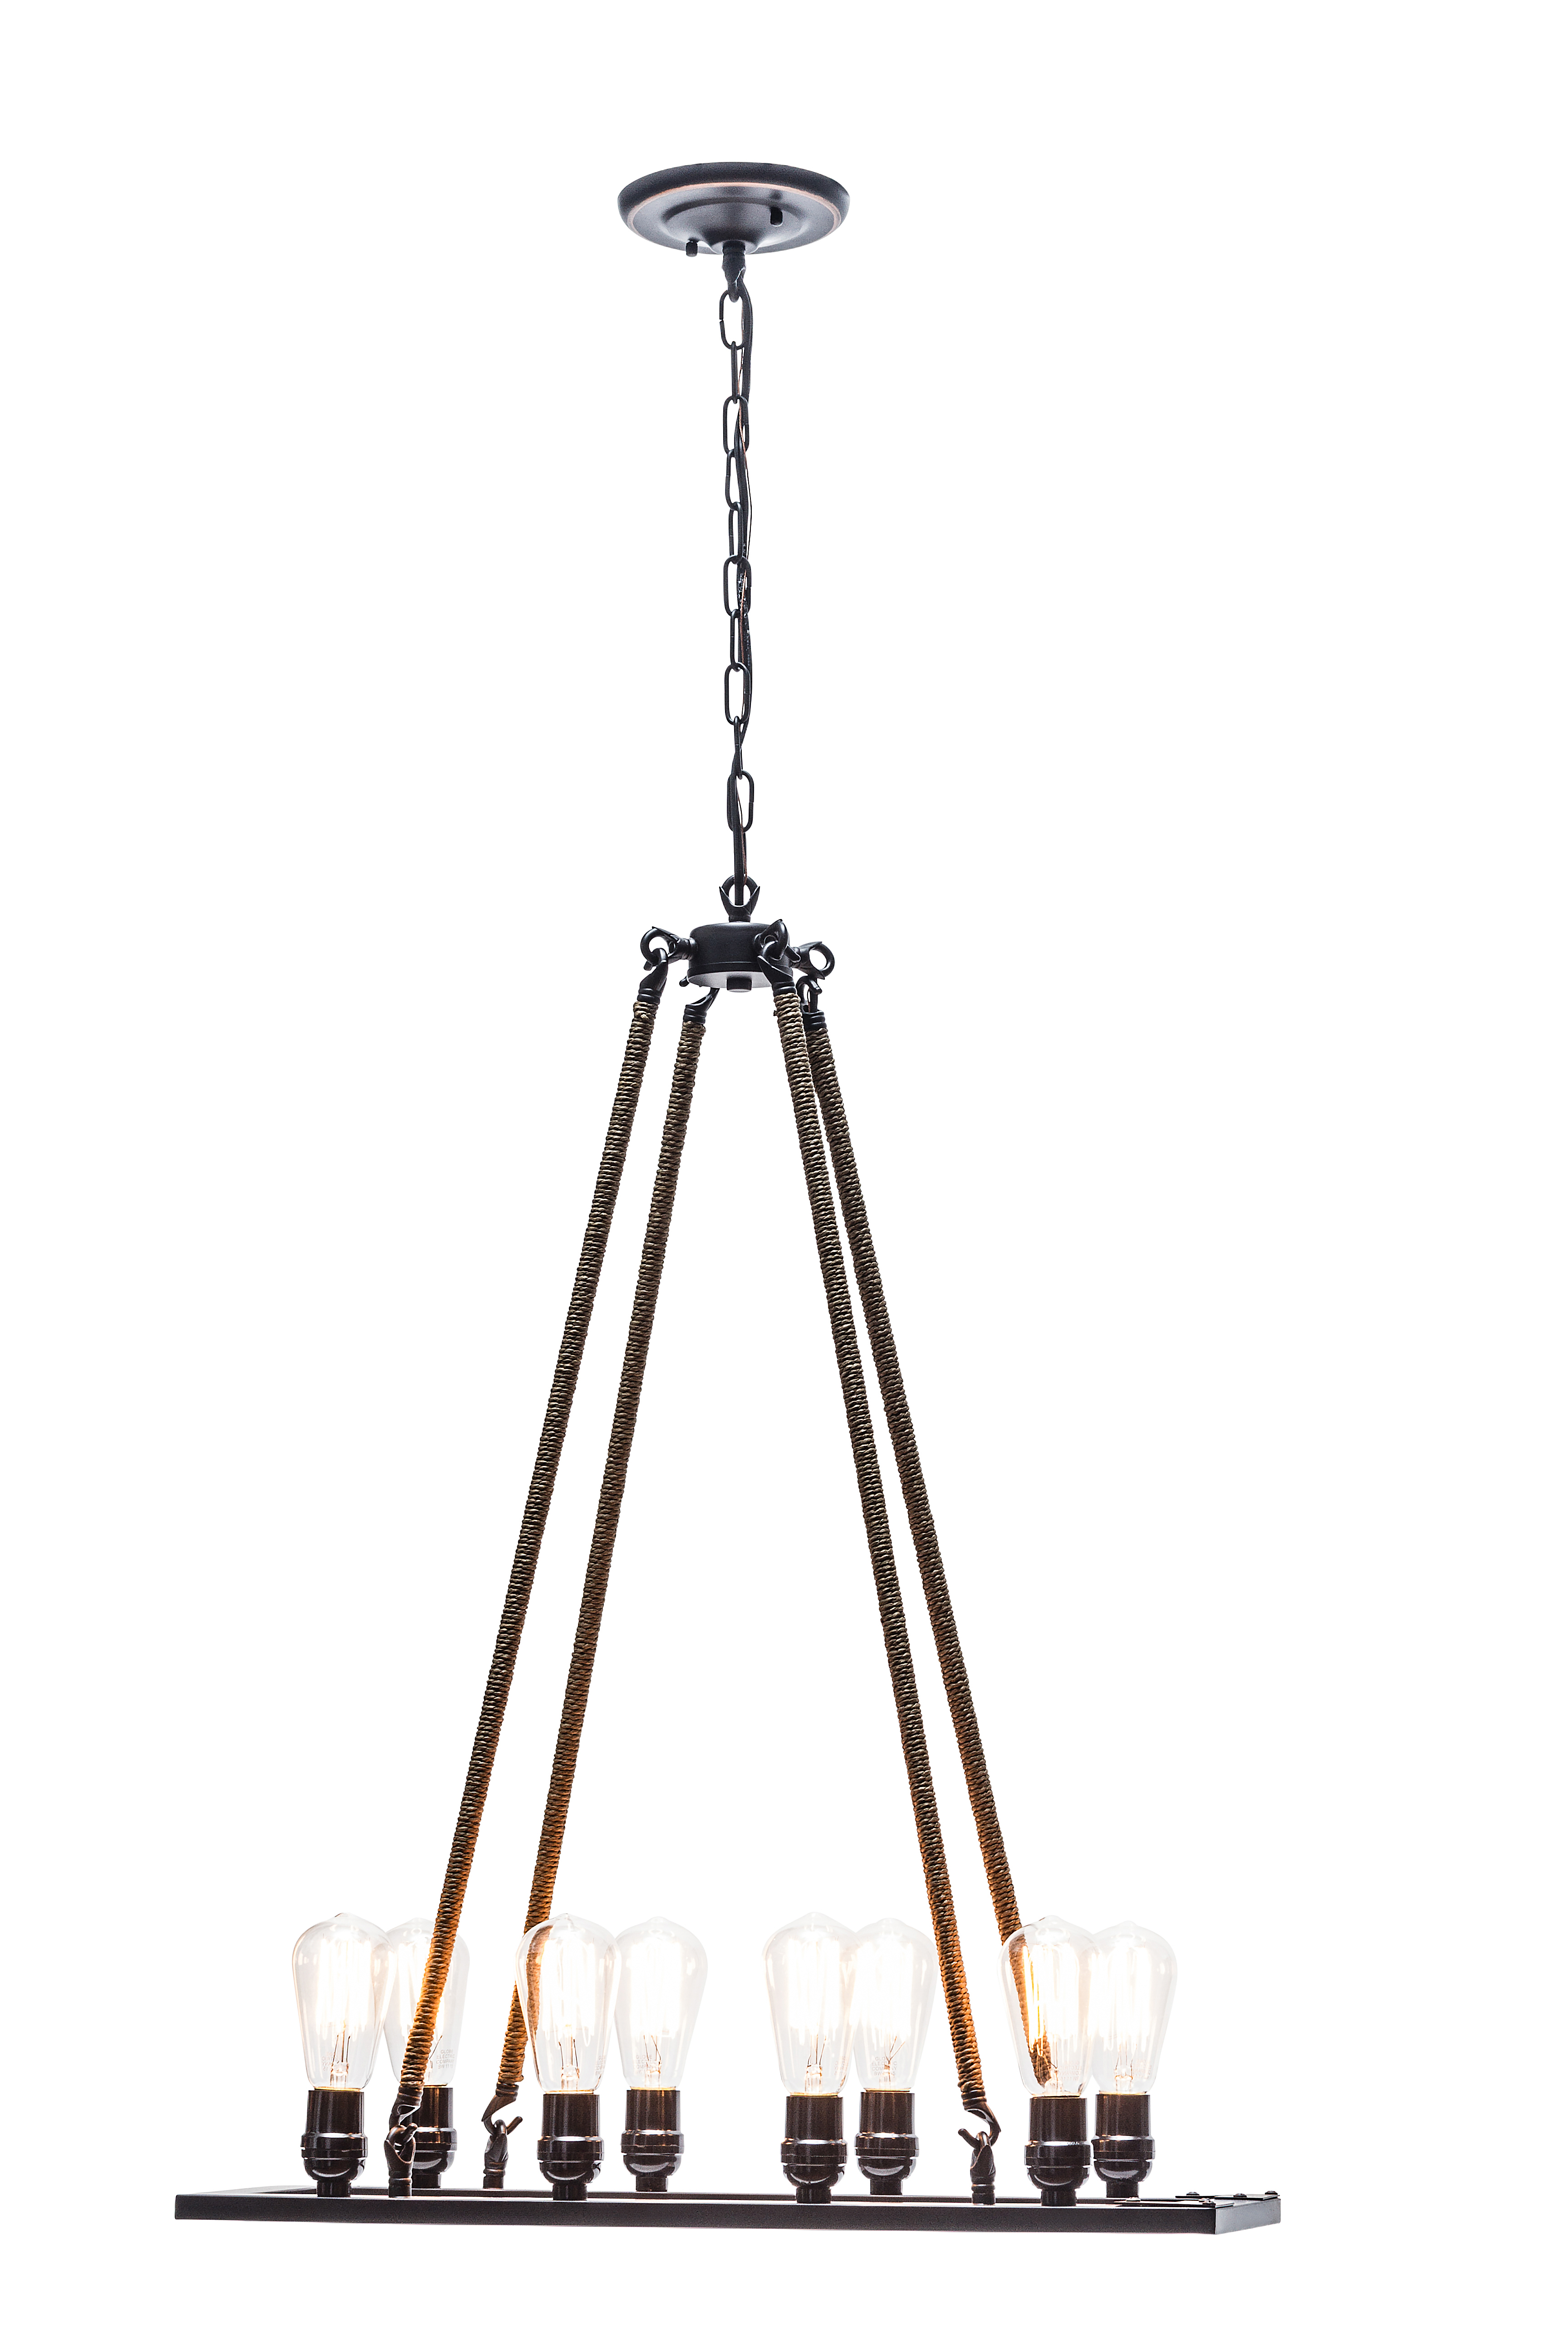 Globe Electric 8-Light Oil Rubbed Bronze Twine Wrapped Vintage Chandelier, 65038 - image 1 of 3